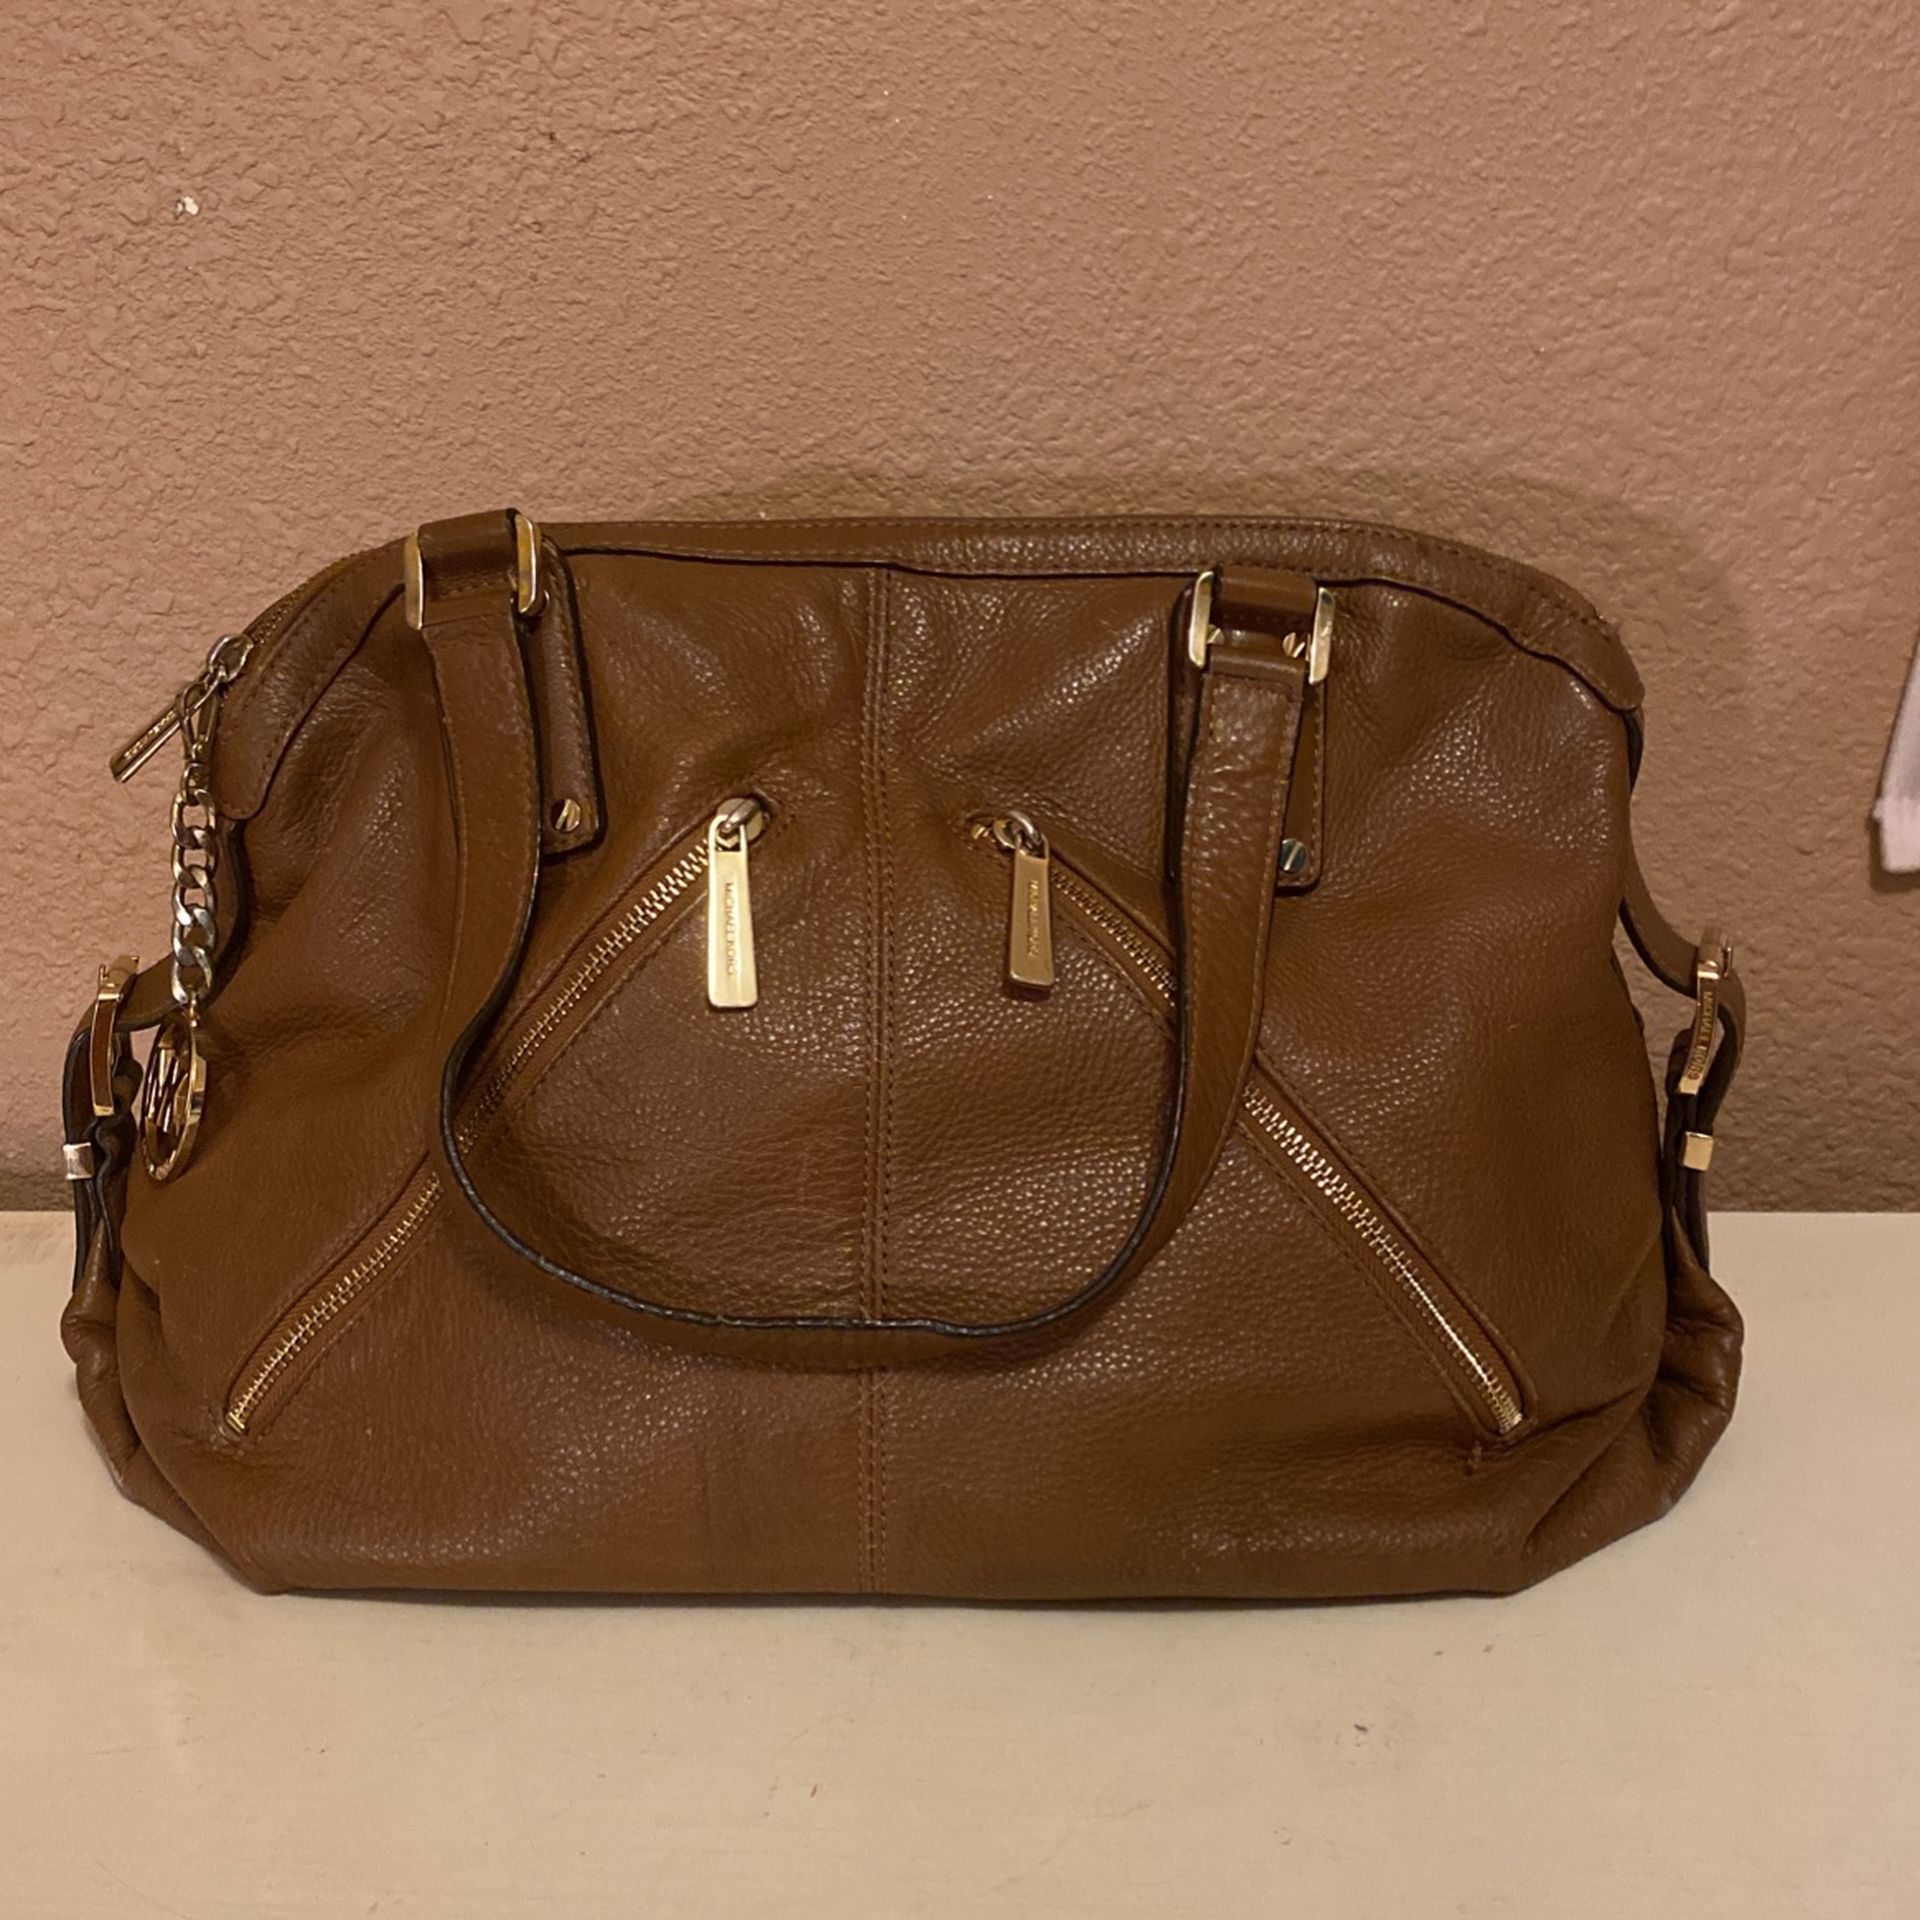 Michael Kors All Leather Large Used Shoulder Bag 2 Back Pockets 2 Front Zippered Pockets Heavy Leather Out Side Perfect $20 C  My Page More Purses Ty